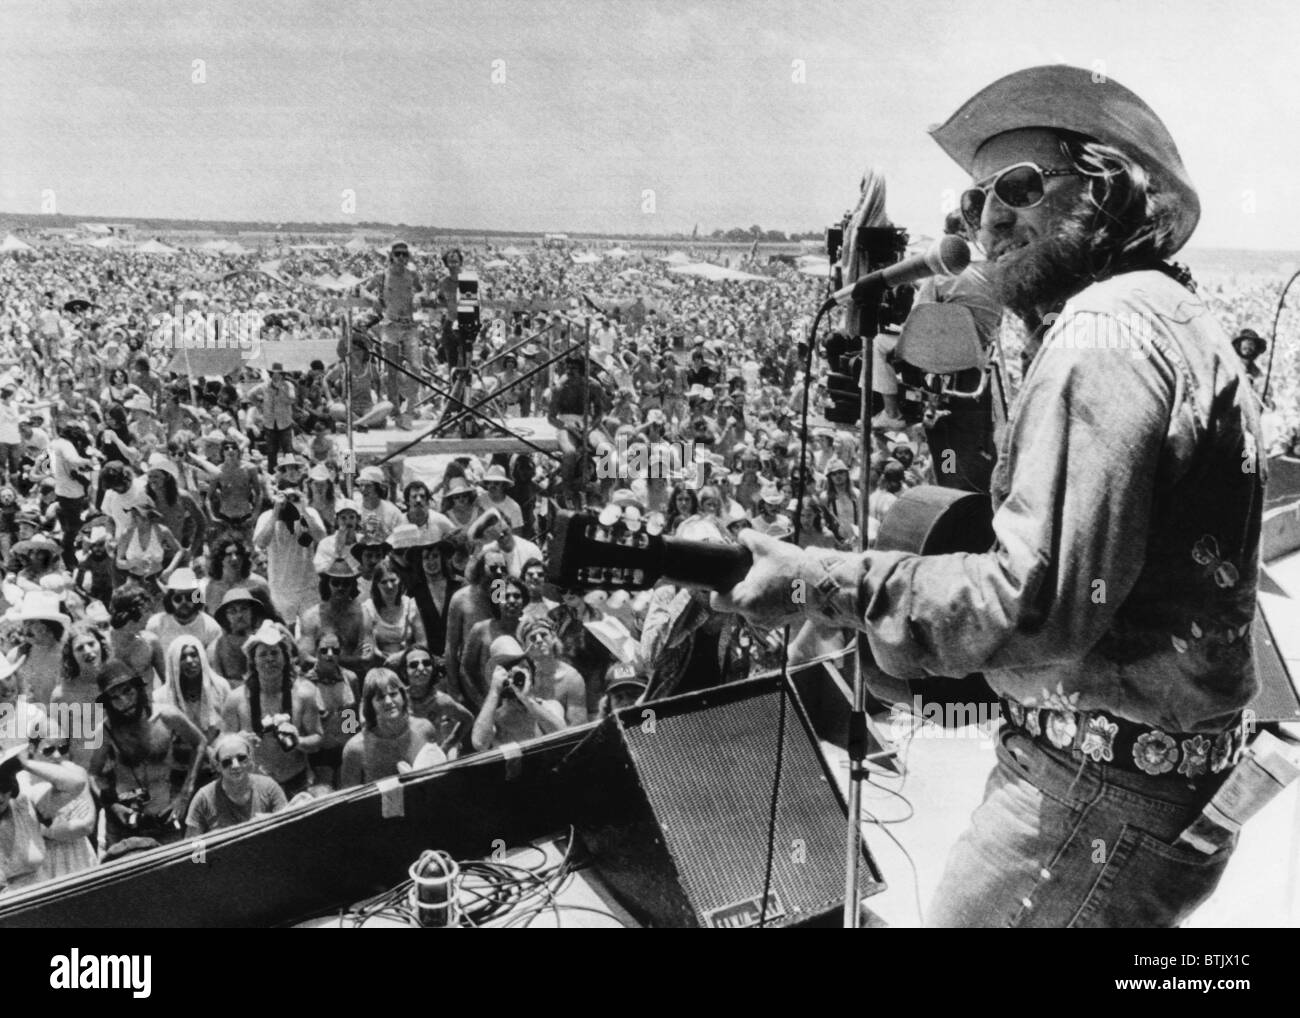 Country rock singer Willie Nelson opening the 'July 4th Picnic' music festival, 1974. Stock Photo